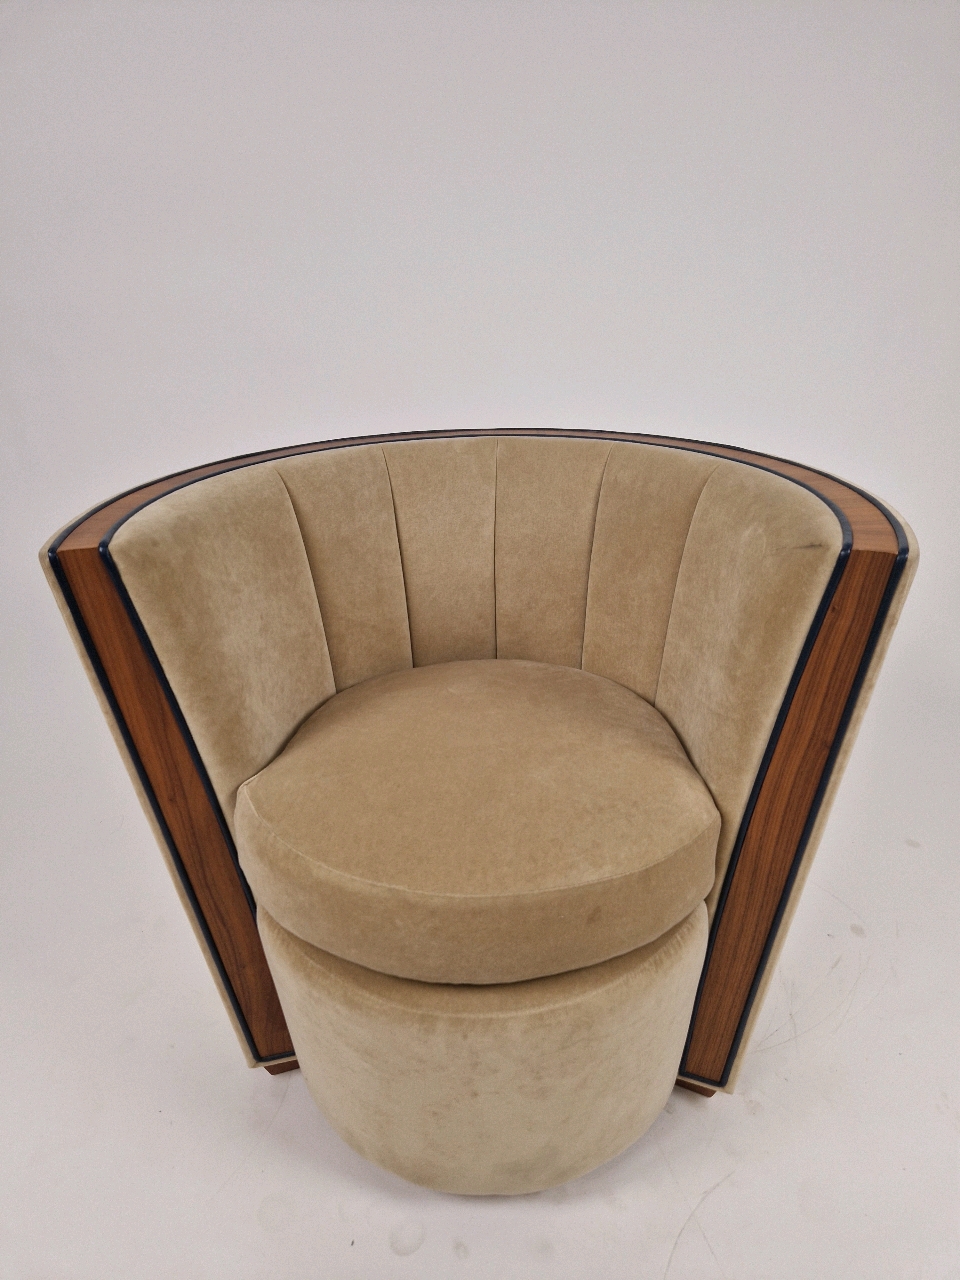 Bespoke David Linley Deco Tub Chair Made for Claridge's Suites